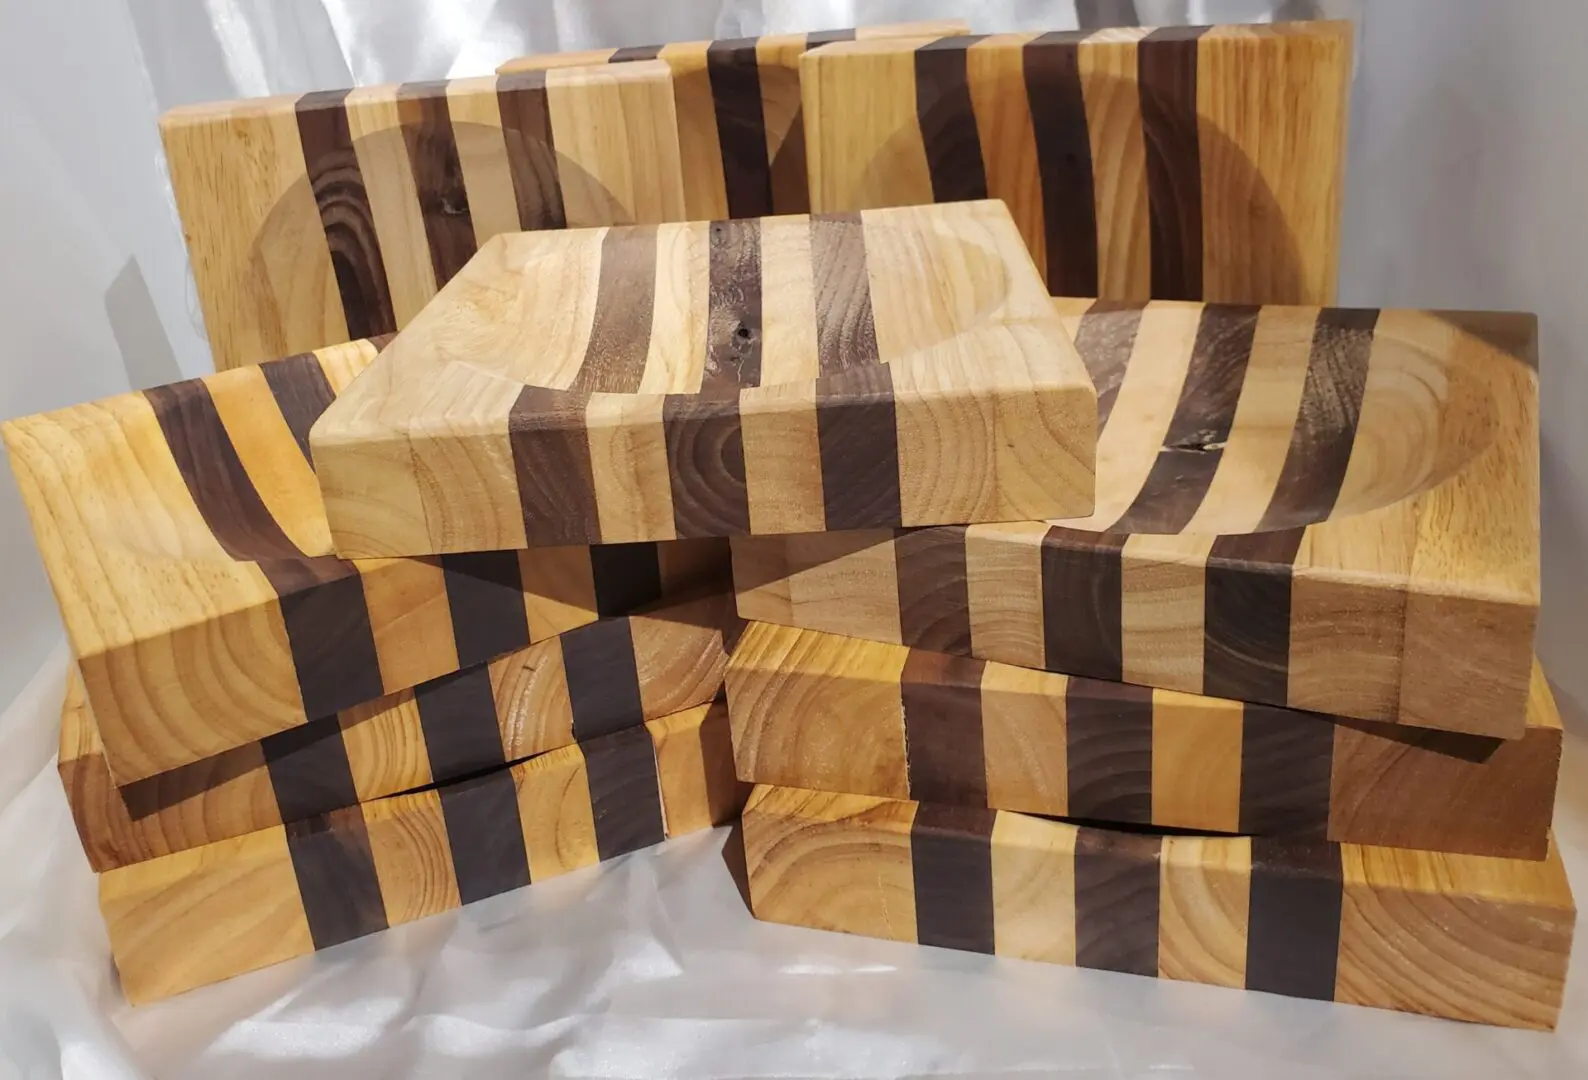 A pile of wooden blocks with black stripes on them.